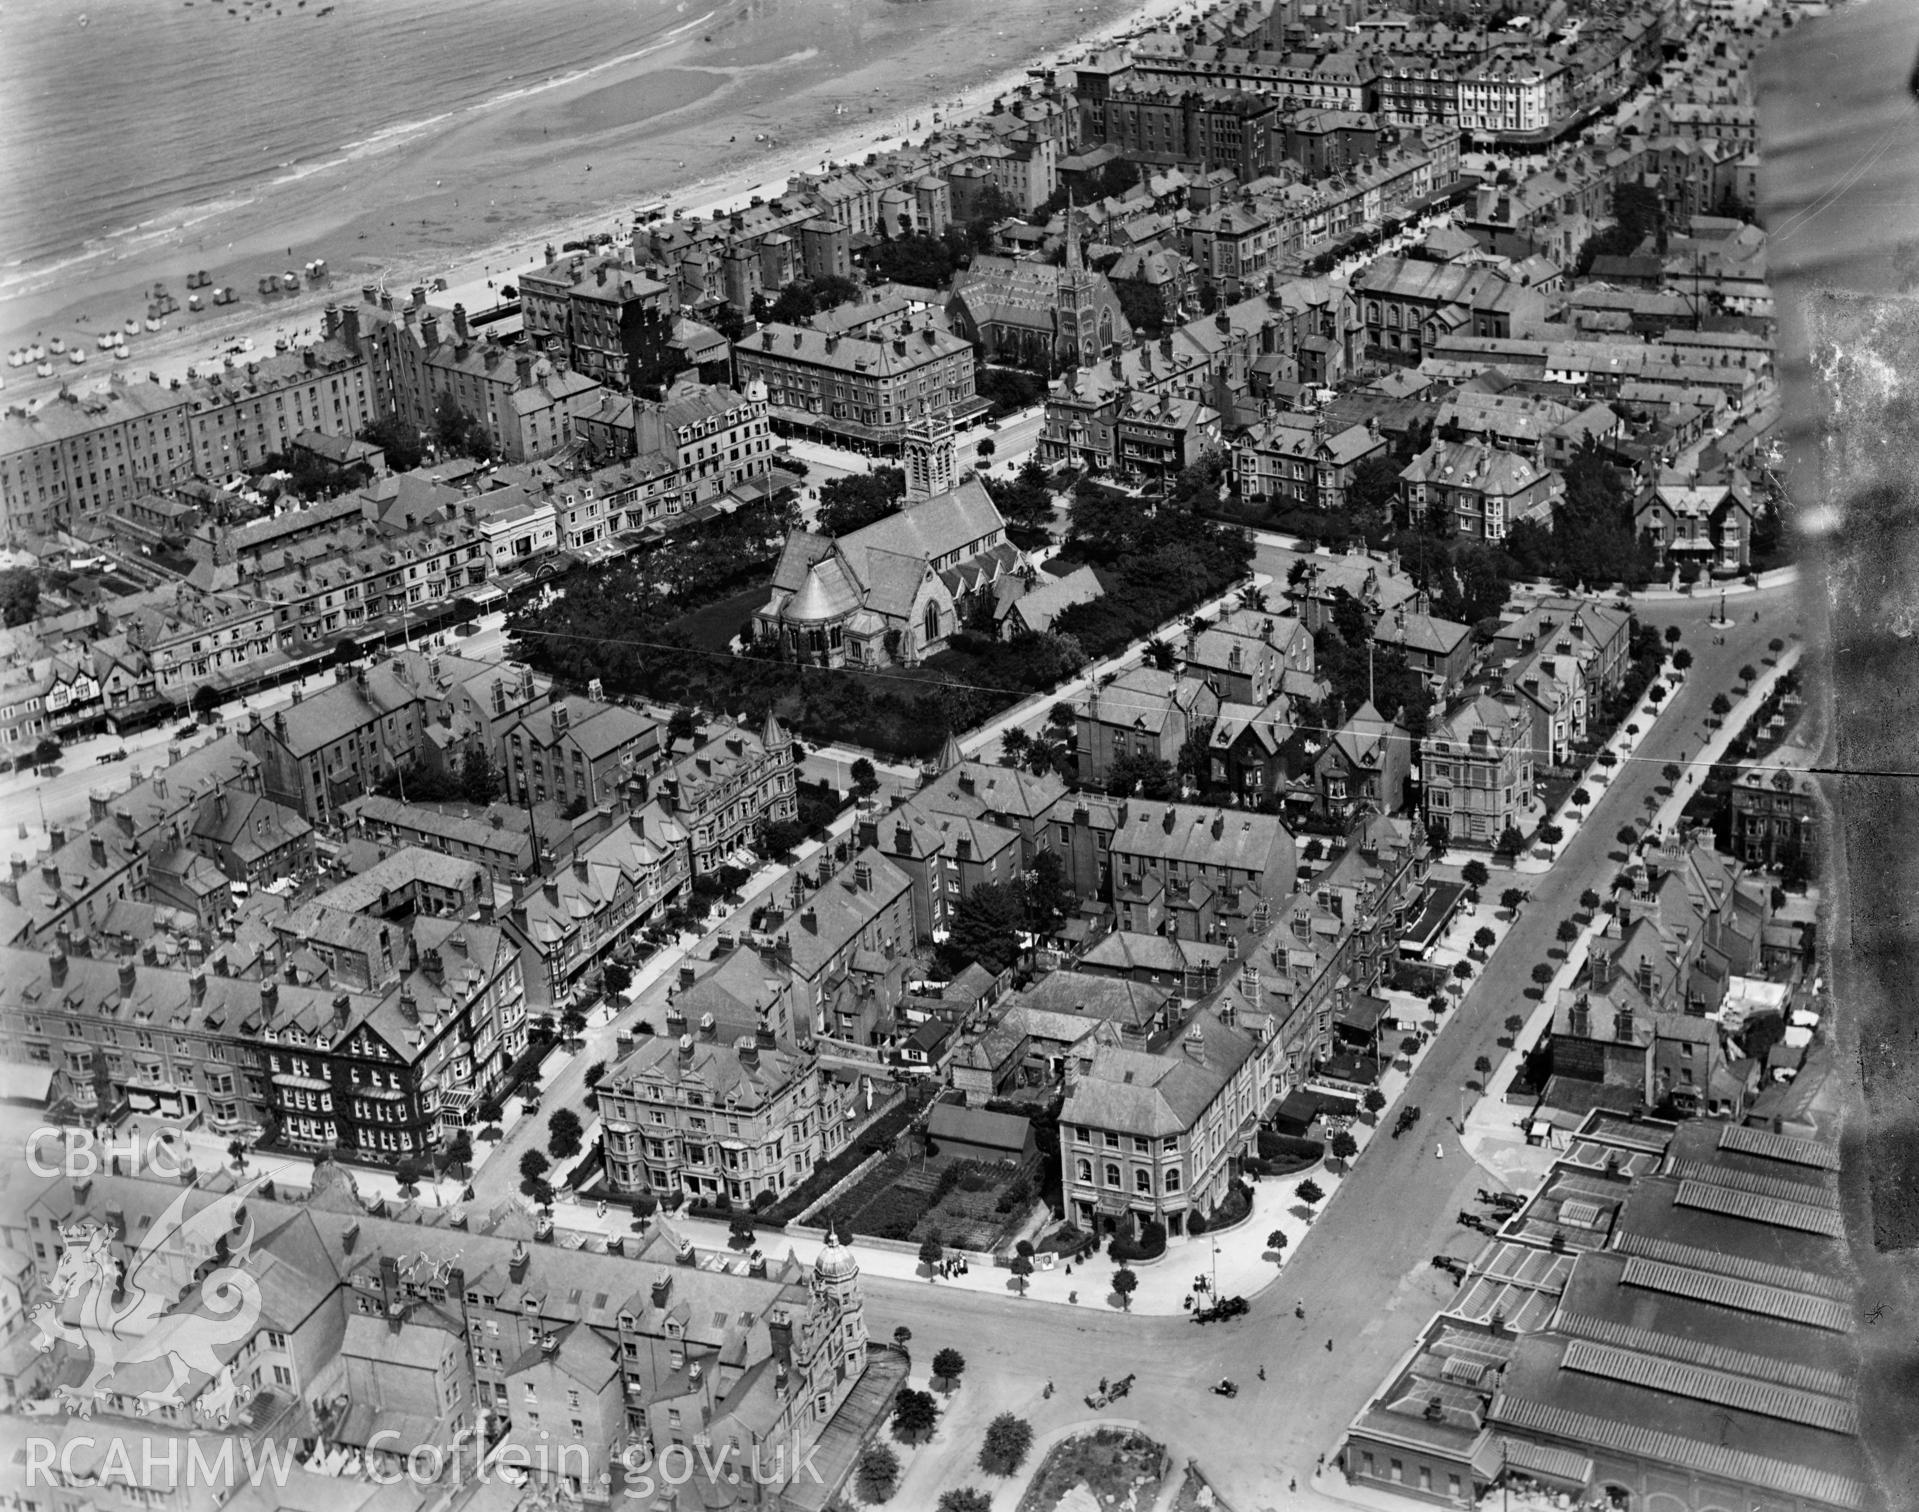 View of Llandudno showing town, oblique aerial view. 5?x4? black and white glass plate negative.